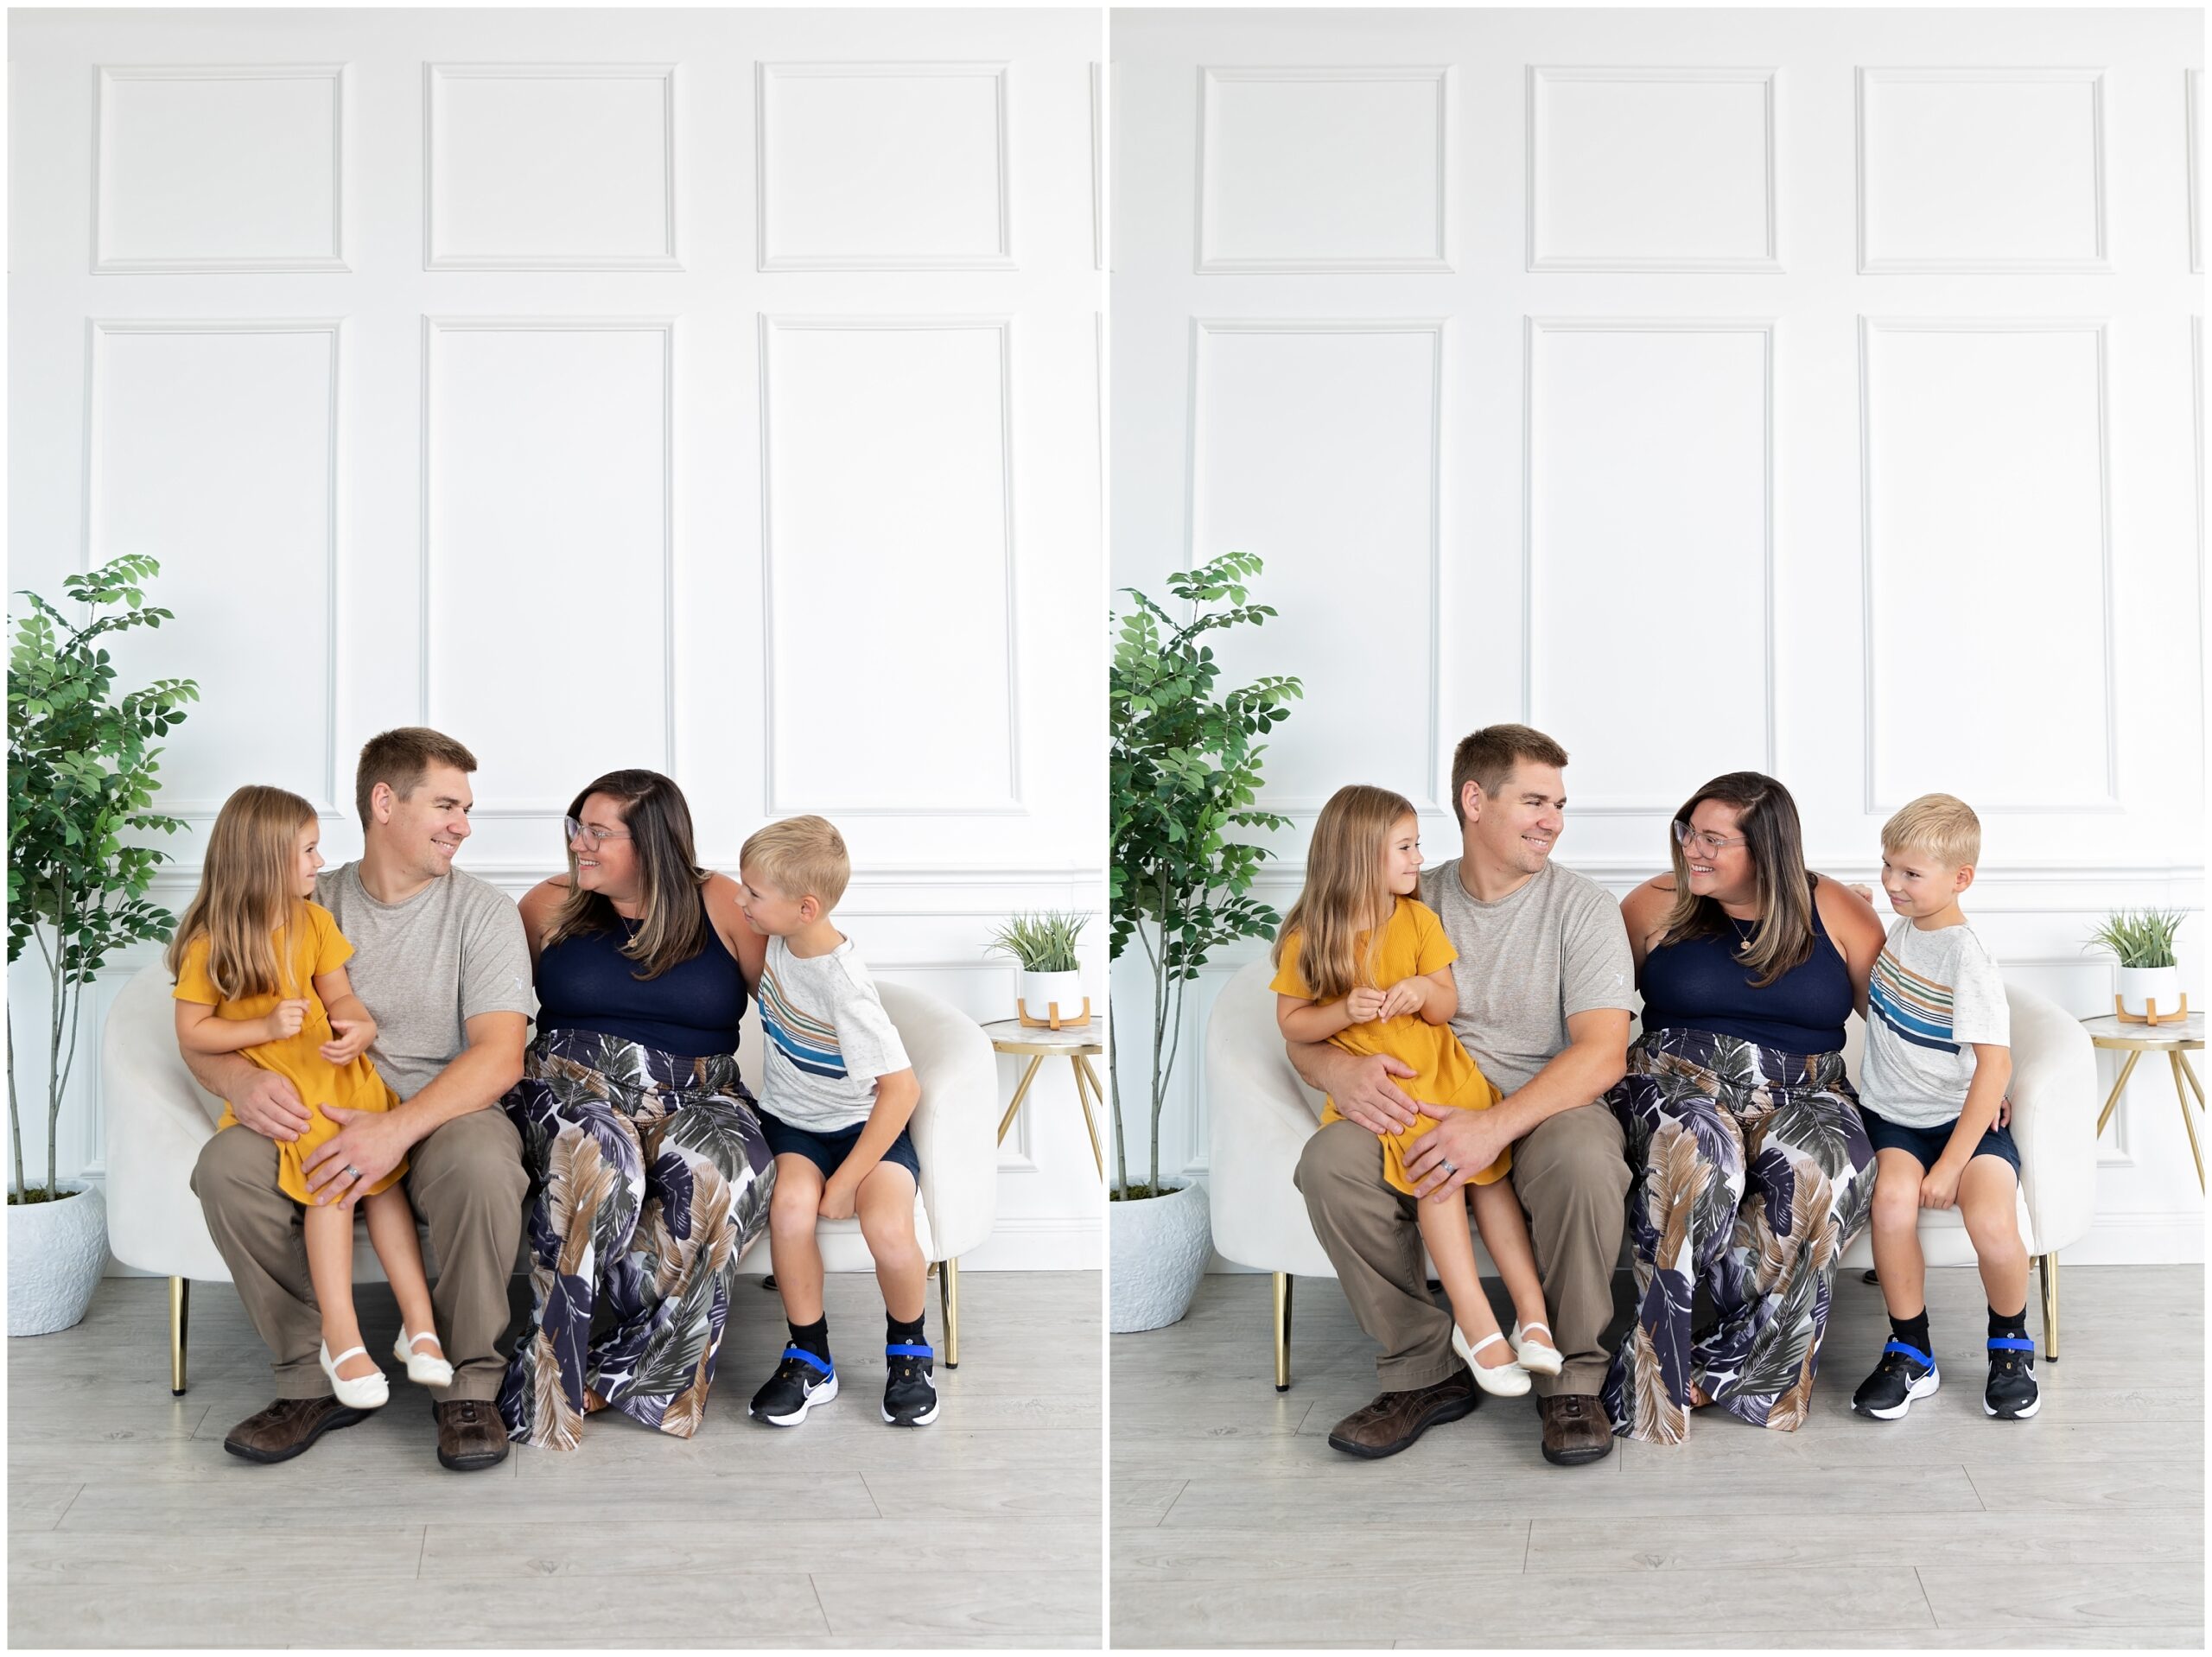 Studio Family Portrait Session in Pittsburgh, PA - Luxe Loft - East End Loft Studio Session in Point Breeze by Plum Borough Family Photographer Catherine Acevedo Photography